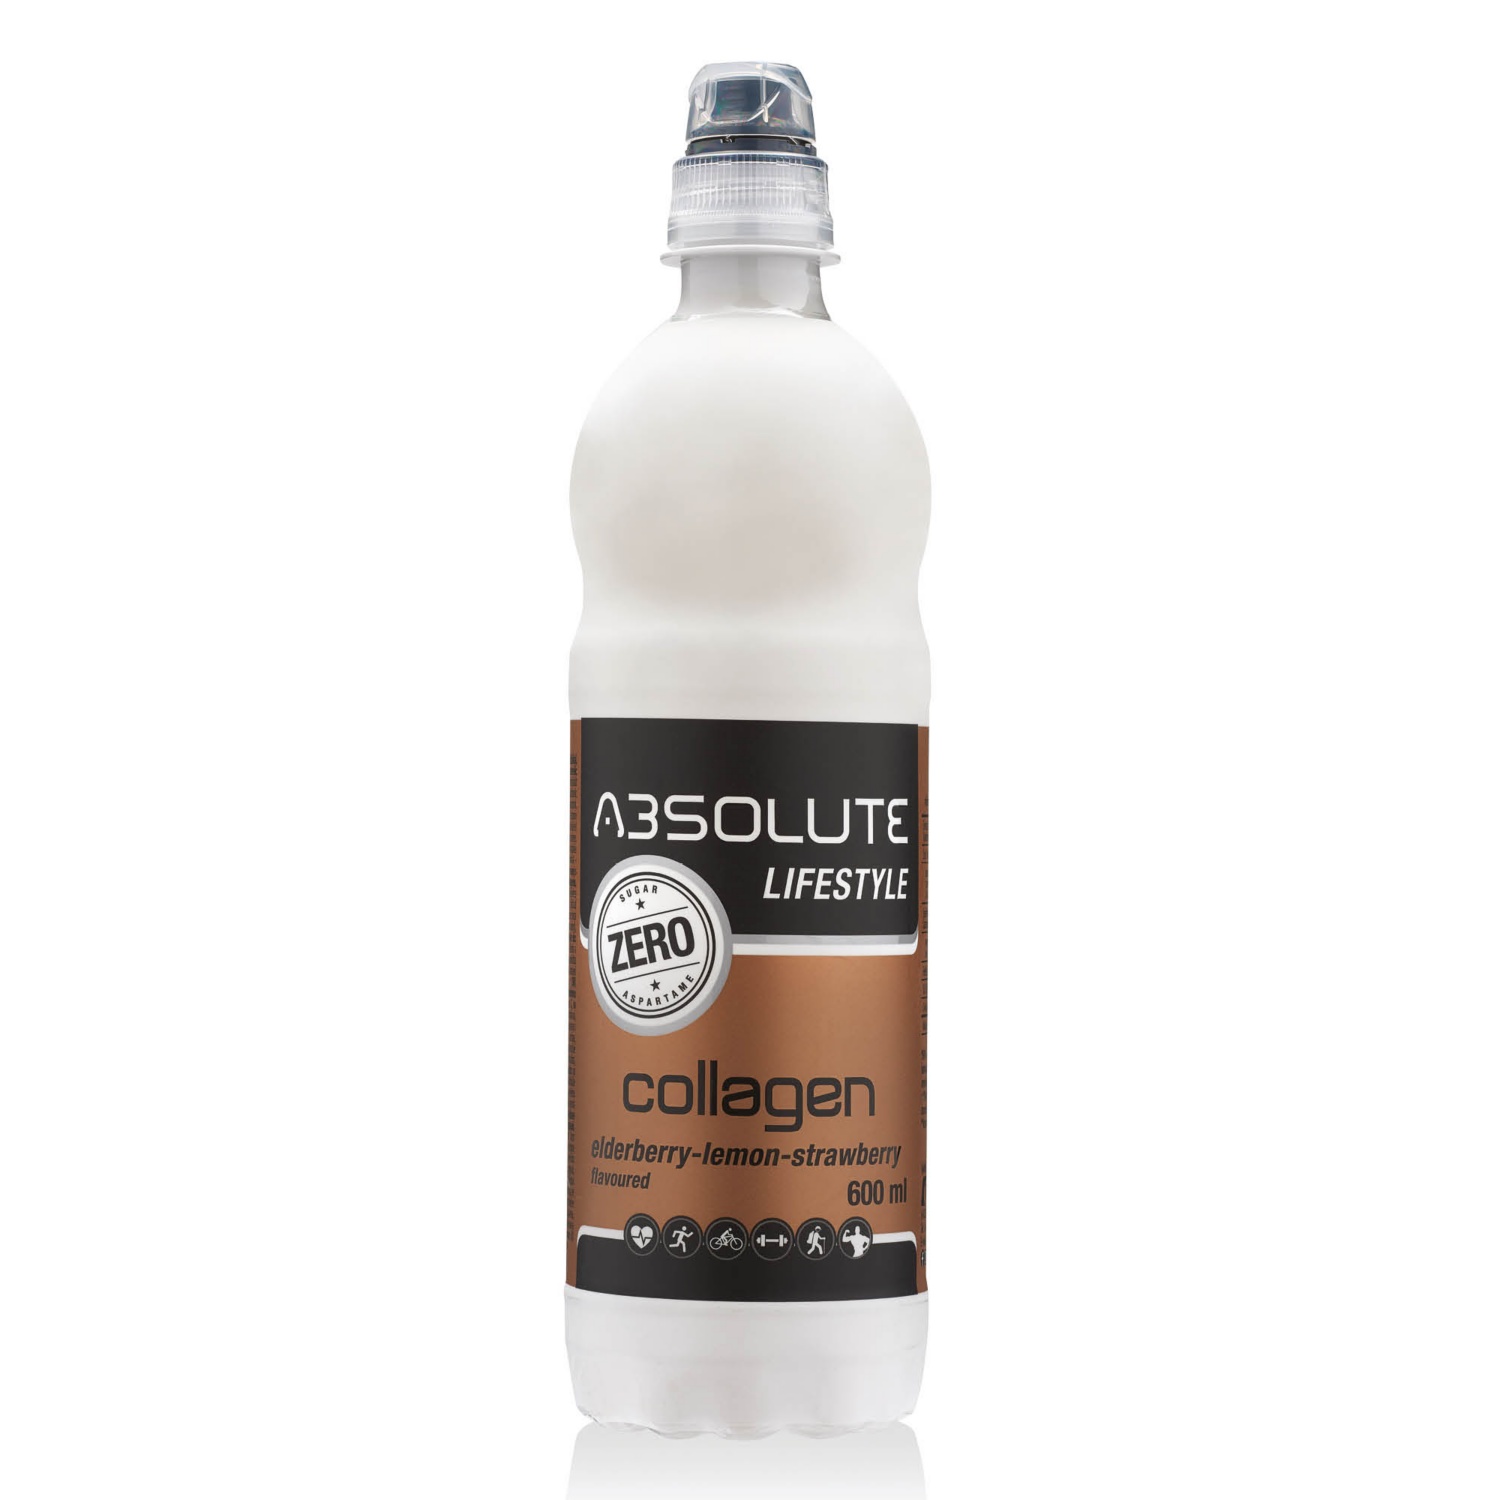 ABSOLUTE LIFESTYLE Sportital, 600 ml, Collagen